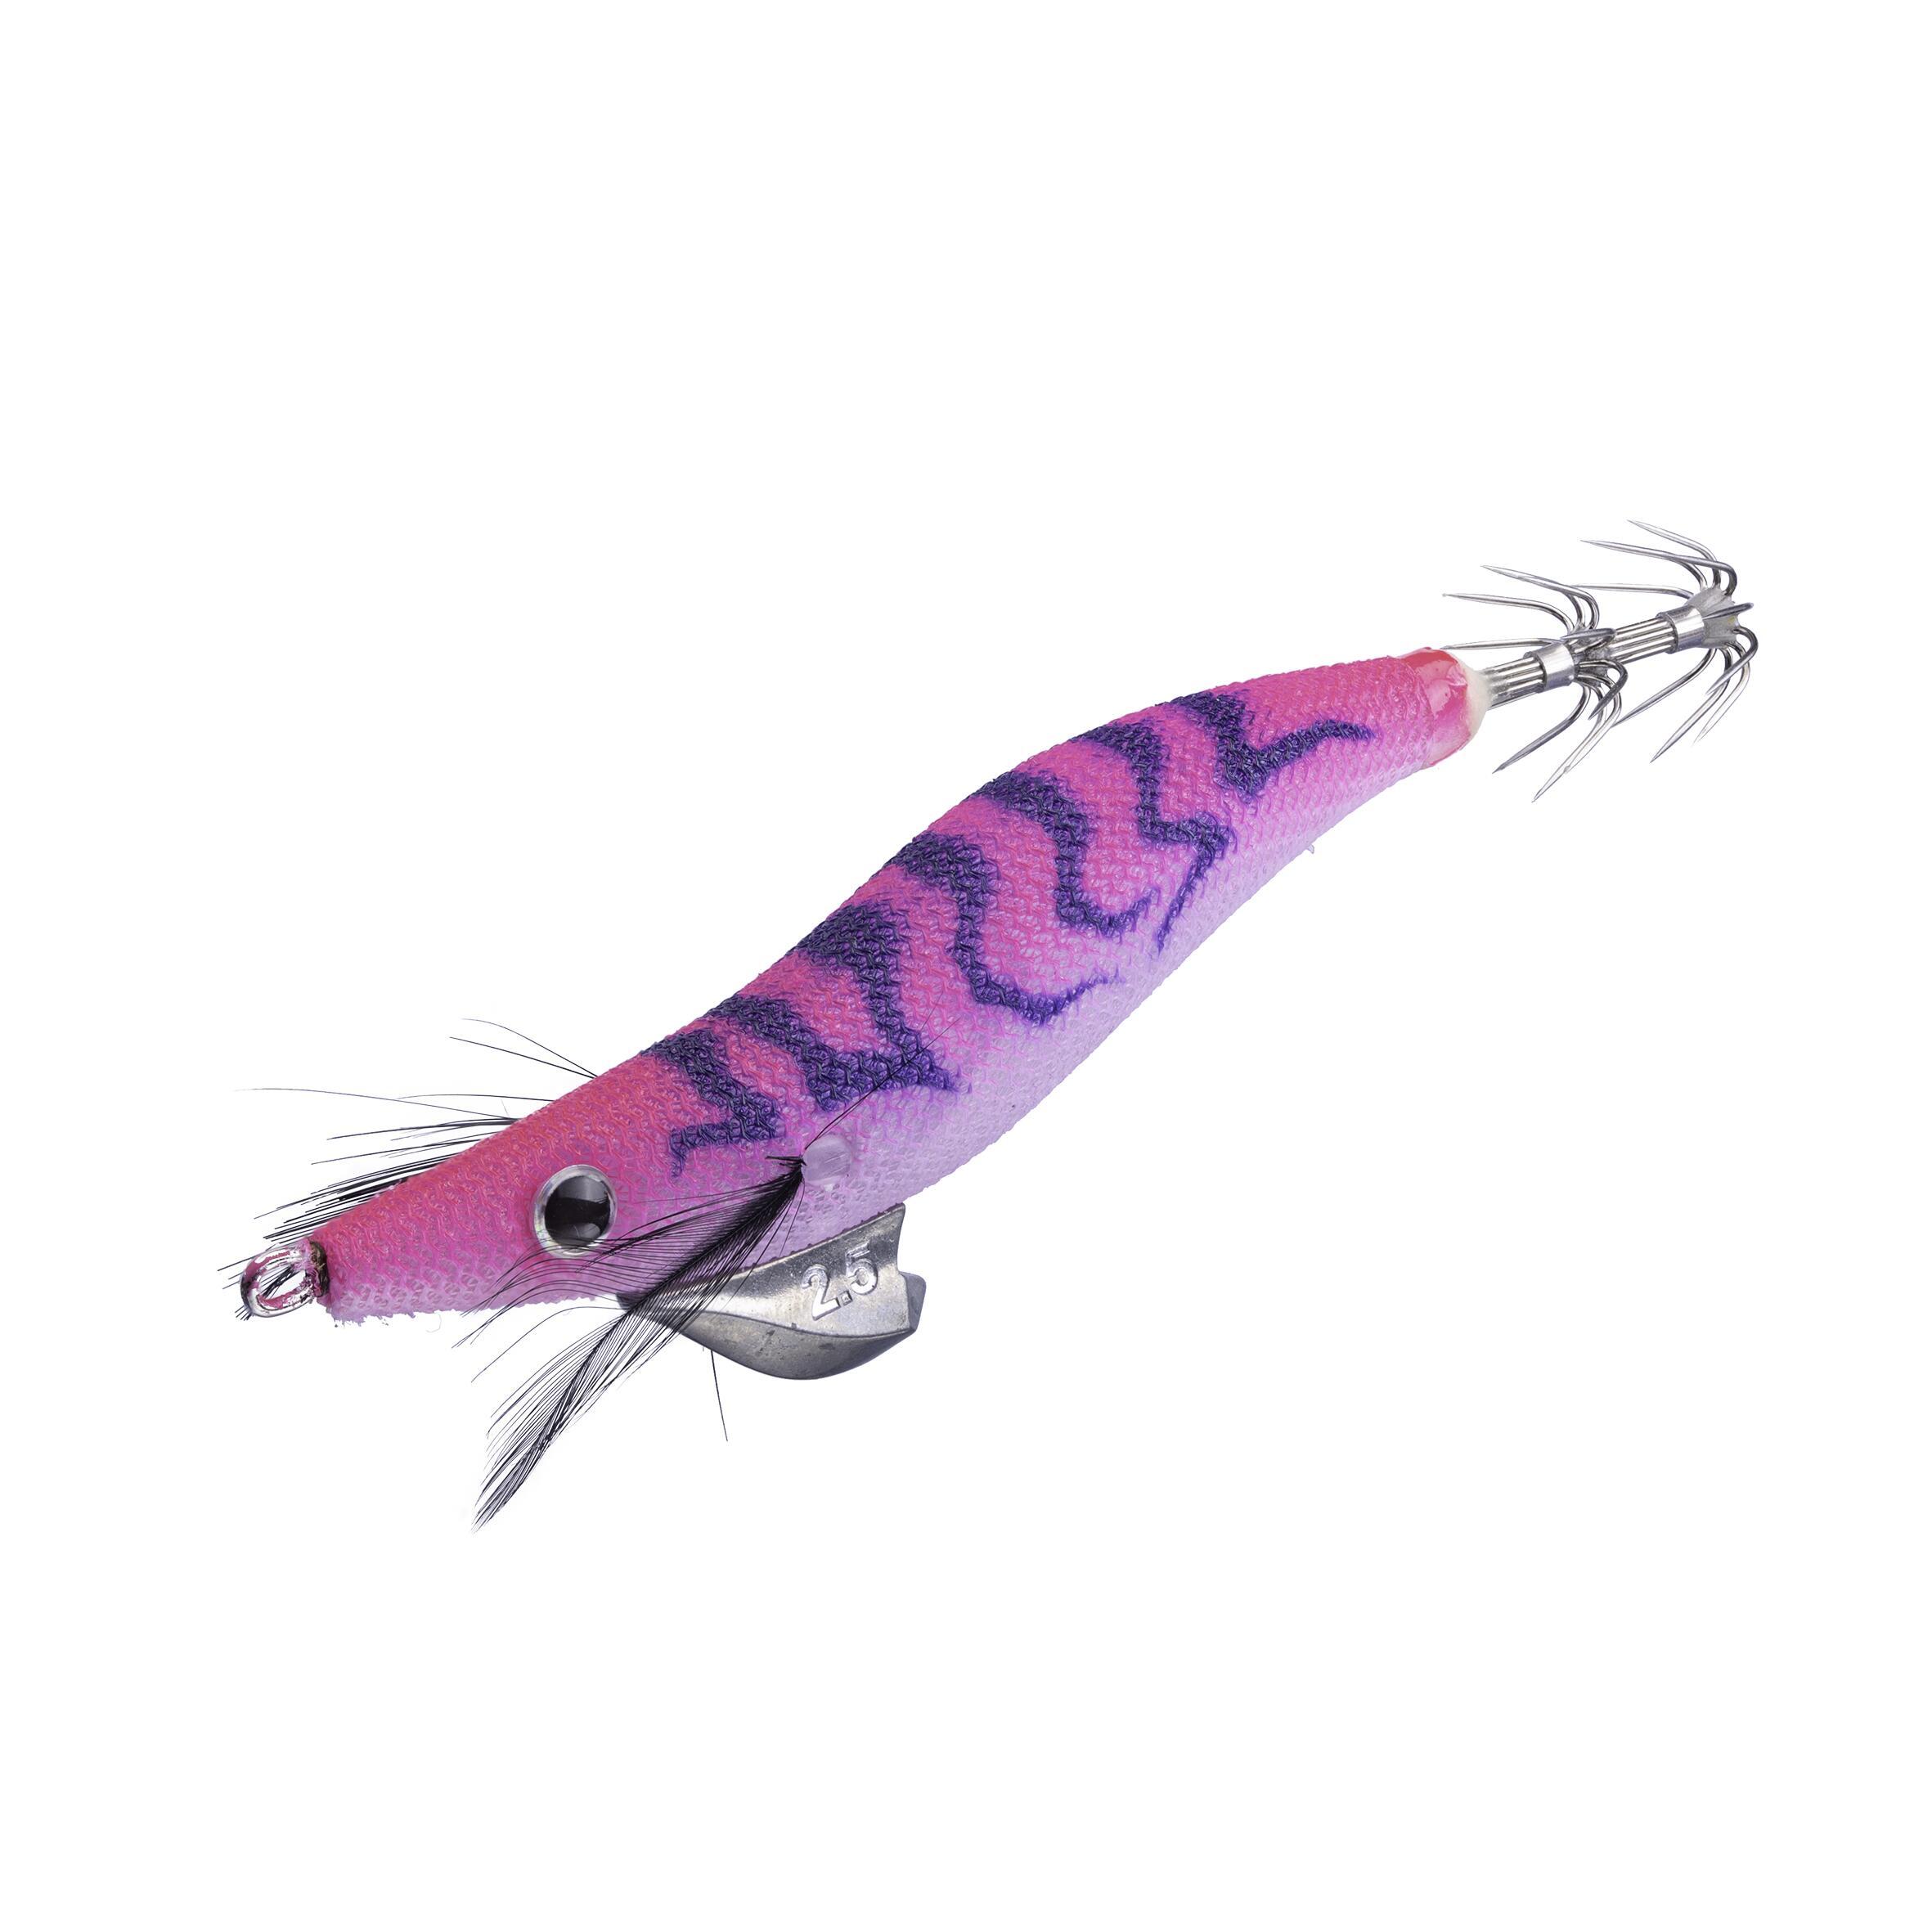 Sea fishing for cuttlefish and squid sinking jig EBI S 2.5 Neon pink 2/3